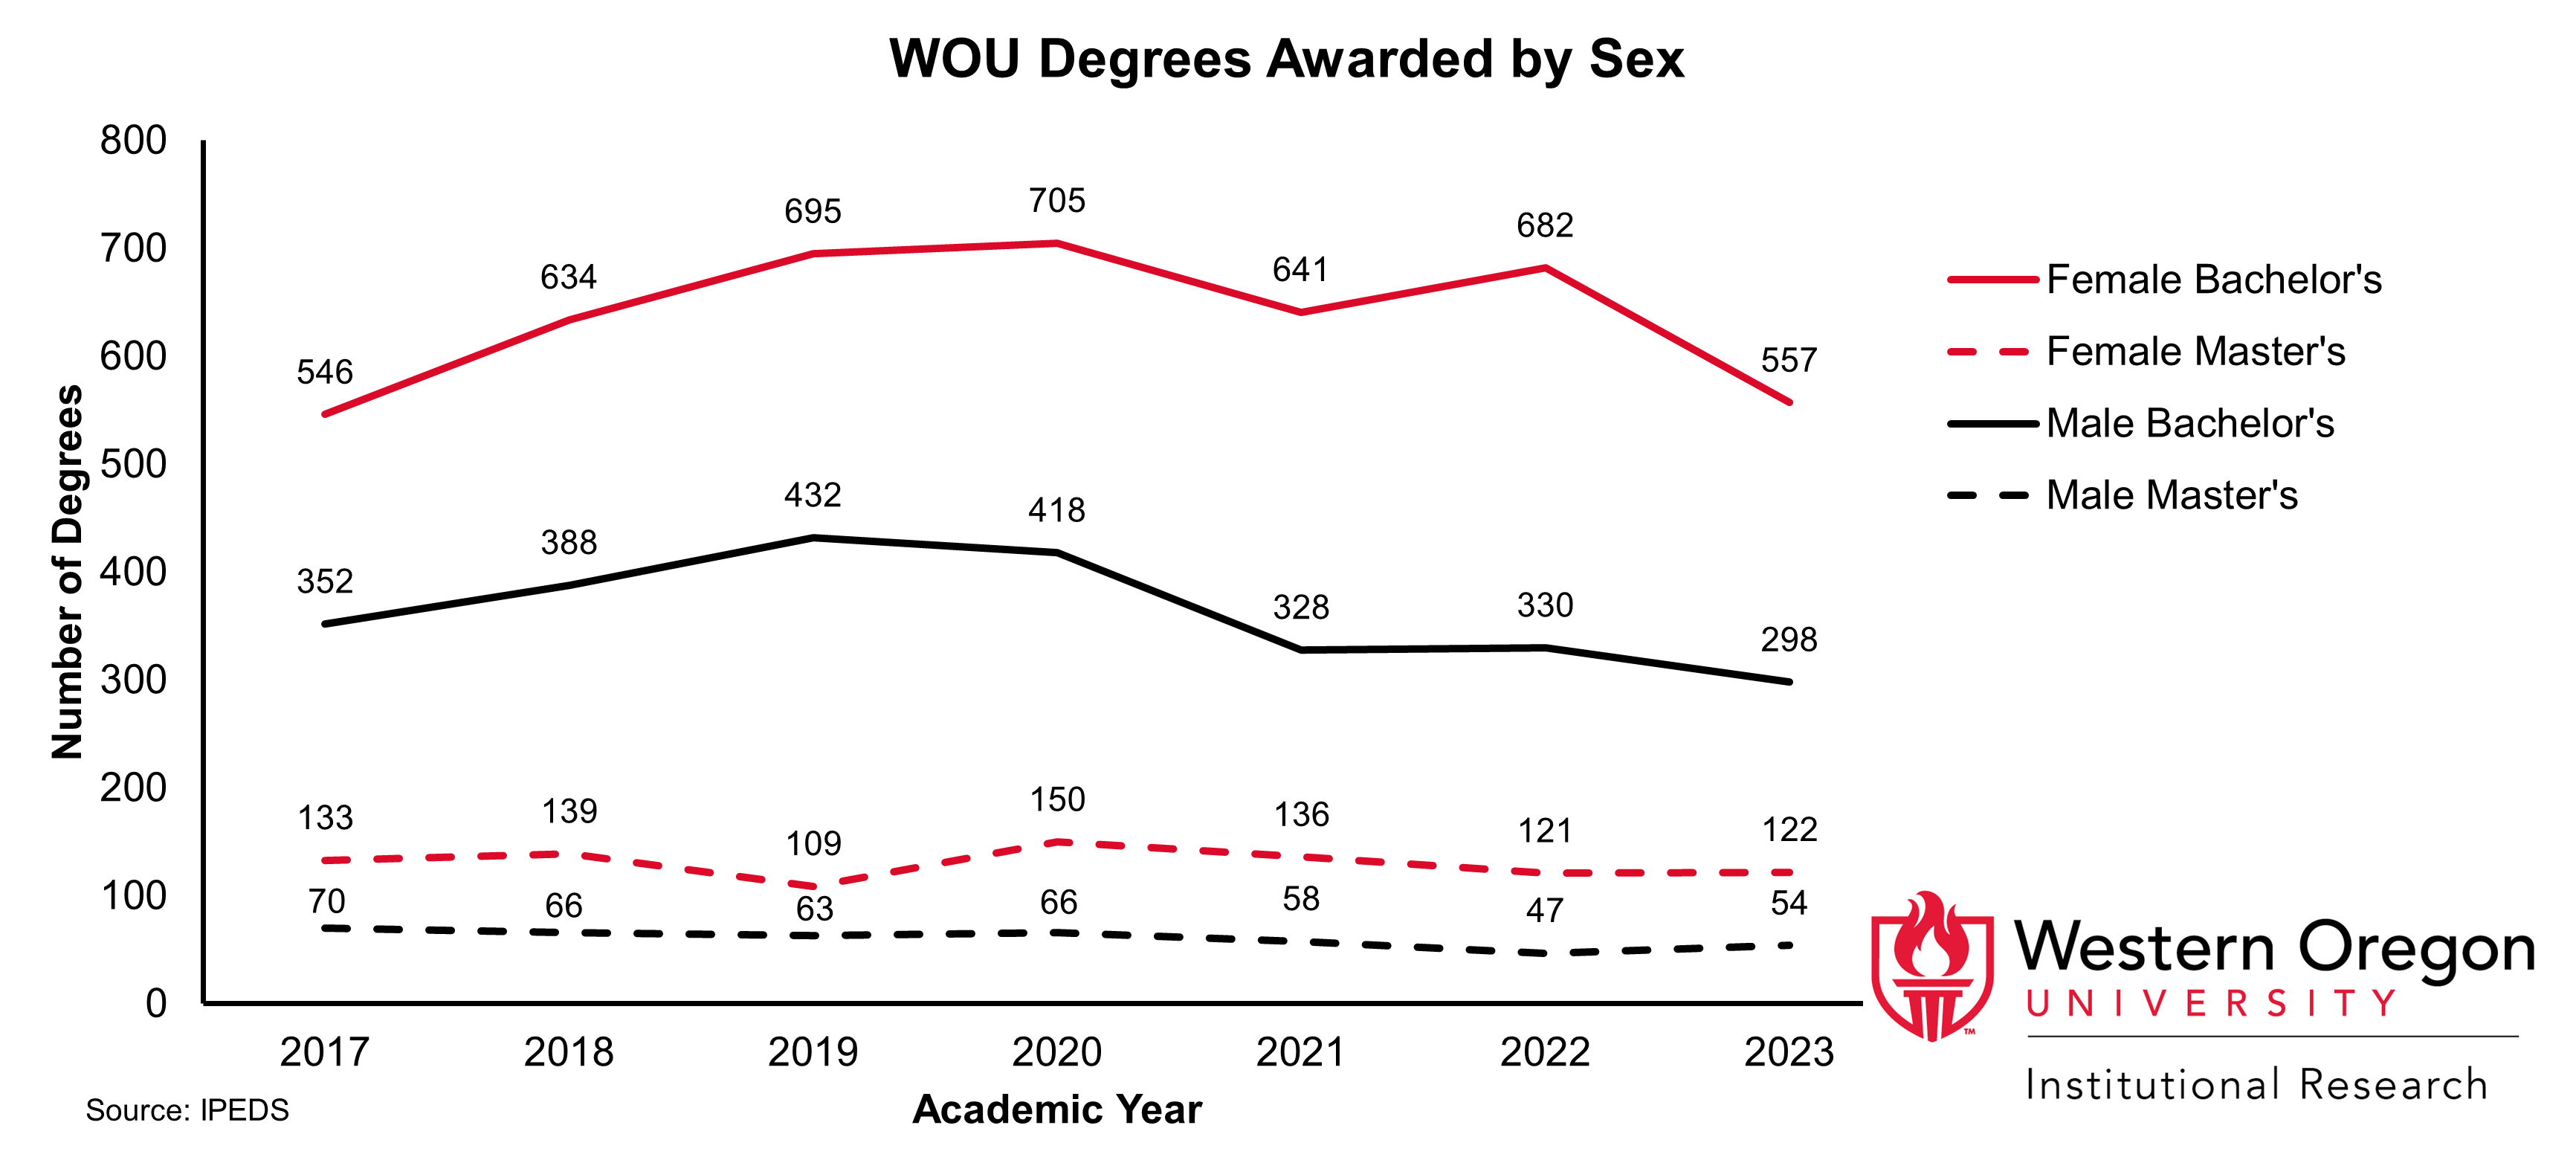 Line graph of the total number of Bachelor's and Master's degrees awarded at WOU between 2017 and 2023, broken out by sex, showing that females are awarded a larger share of the total number of degrees than males.